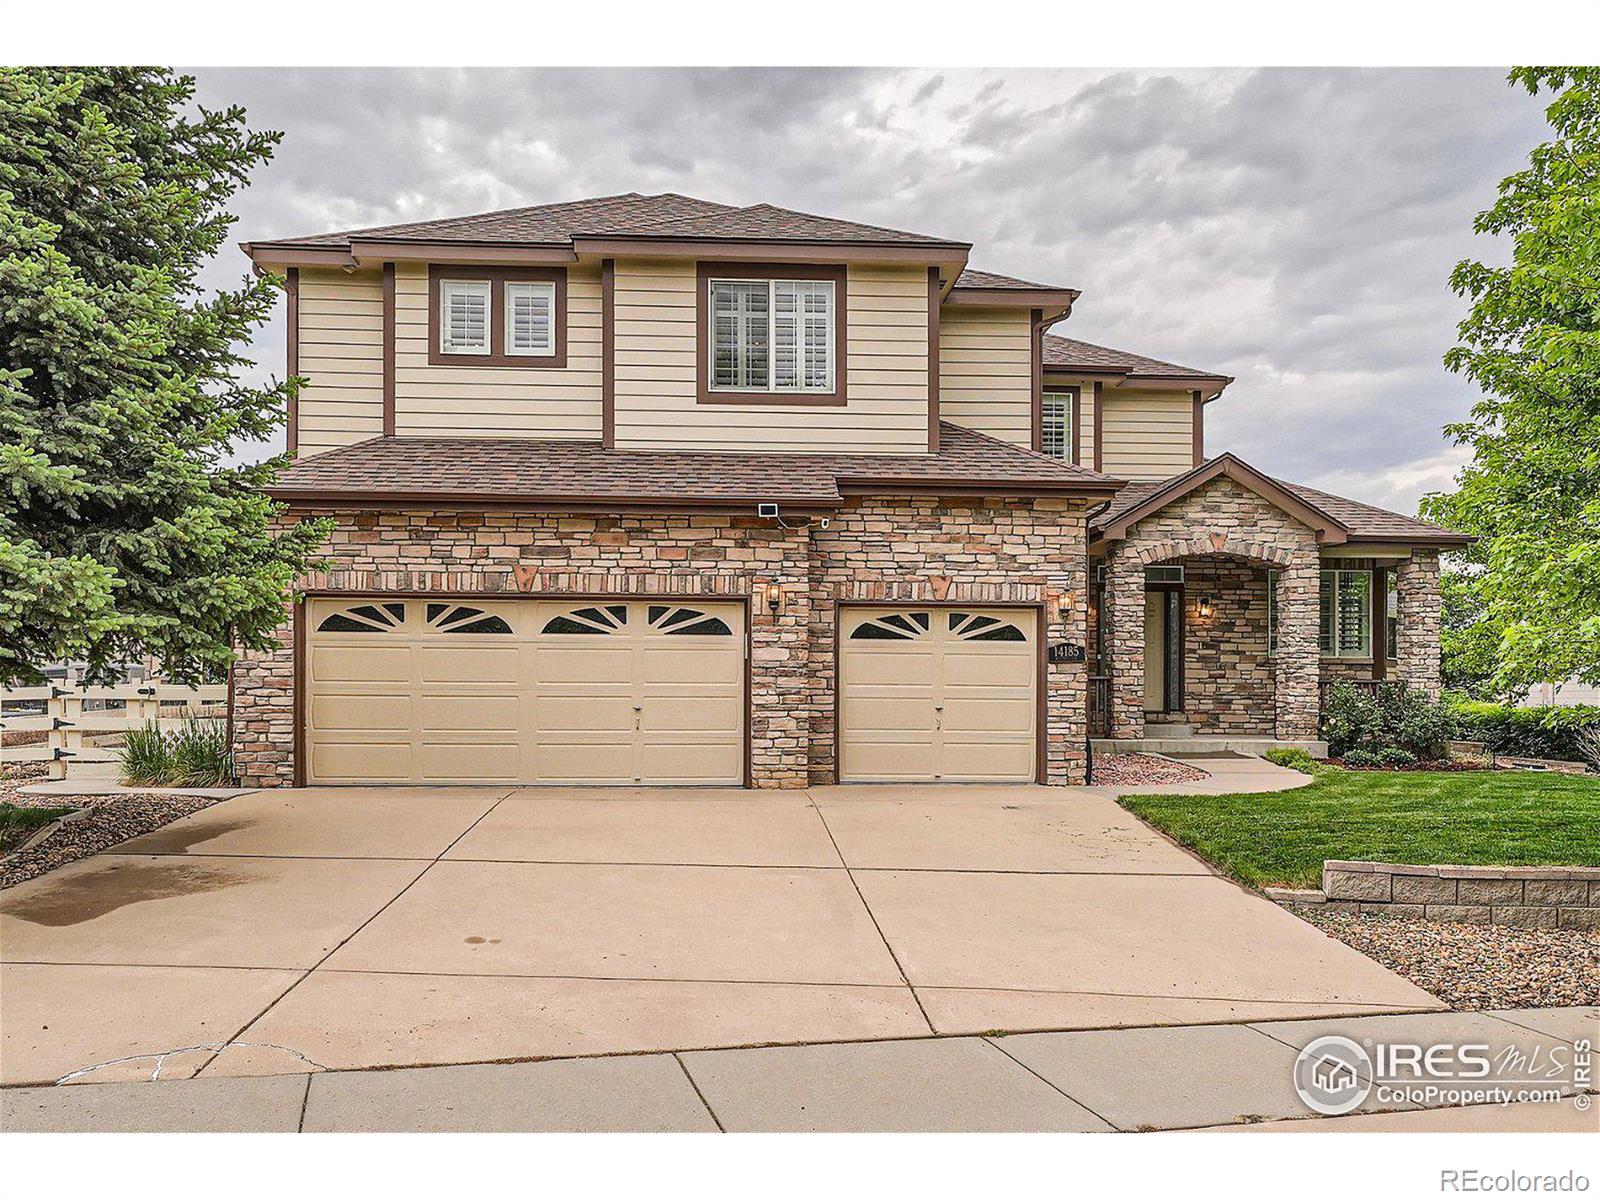 14185  Whitney Circle, broomfield MLS: 4567891011282 Beds: 5 Baths: 5 Price: $1,200,000